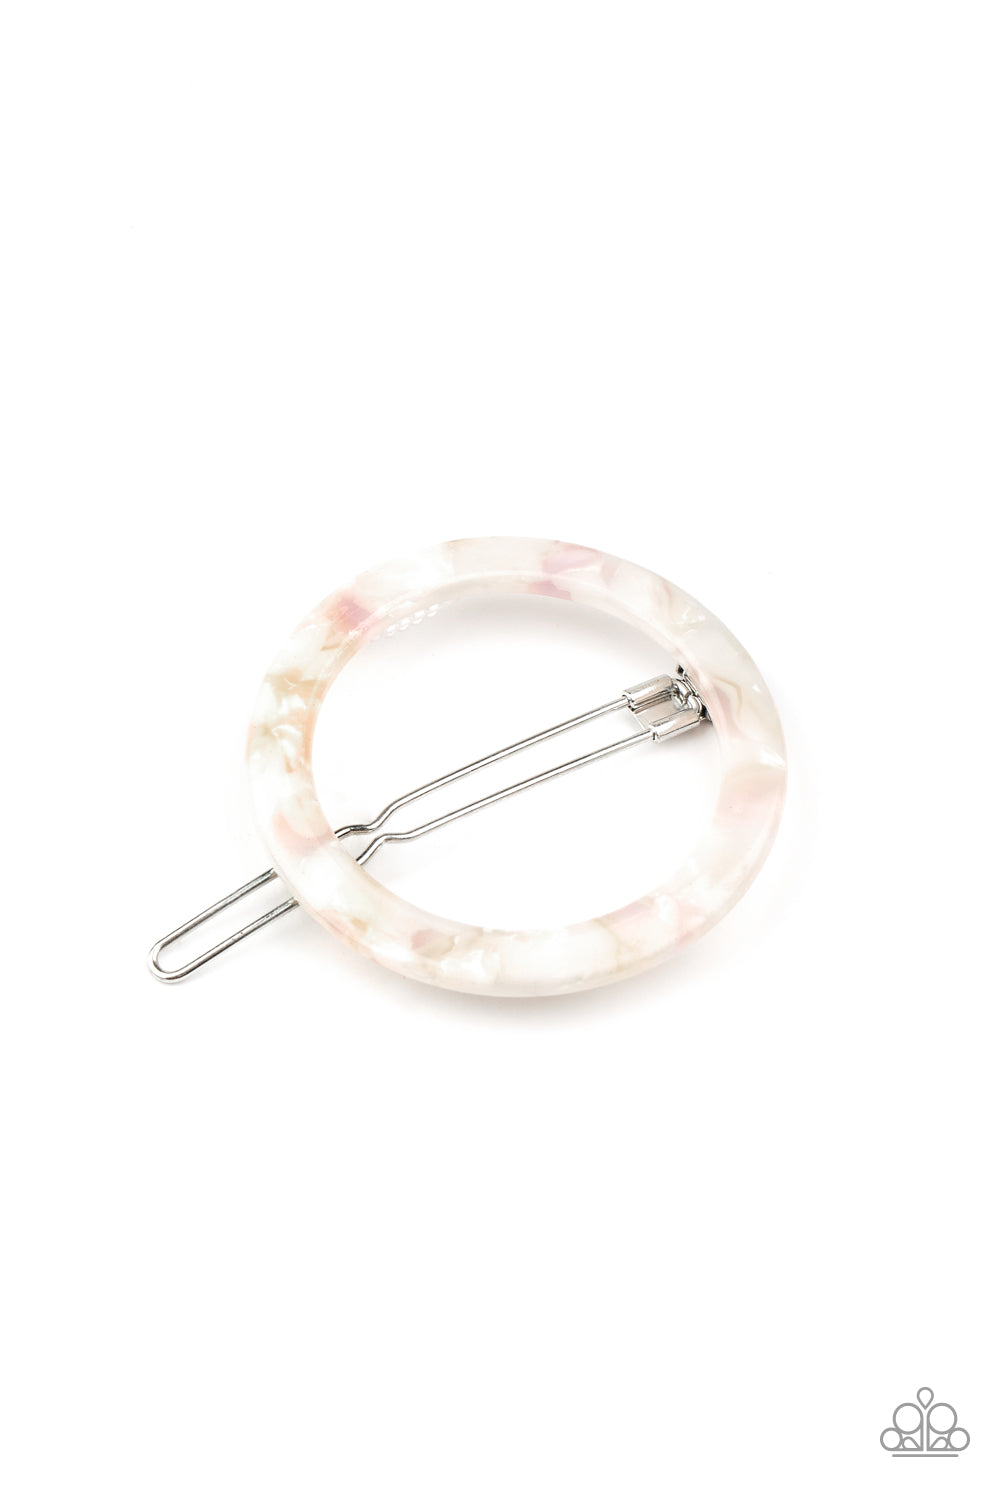 In The Round - white - Paparazzi hair clip